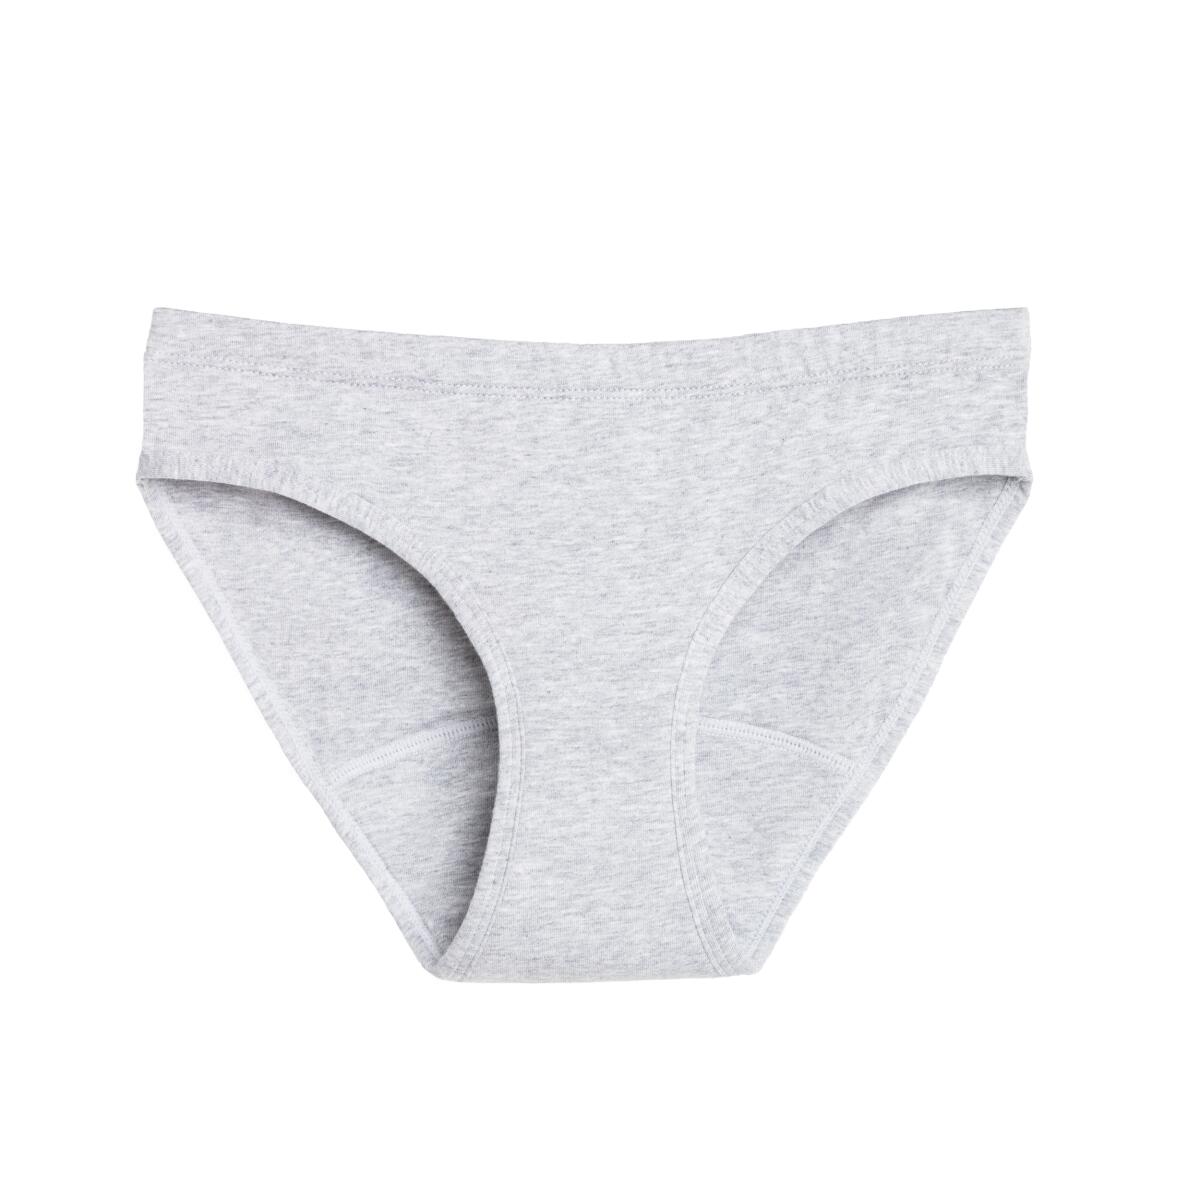 Low-Rise Period Panties in Fashion Newspaper